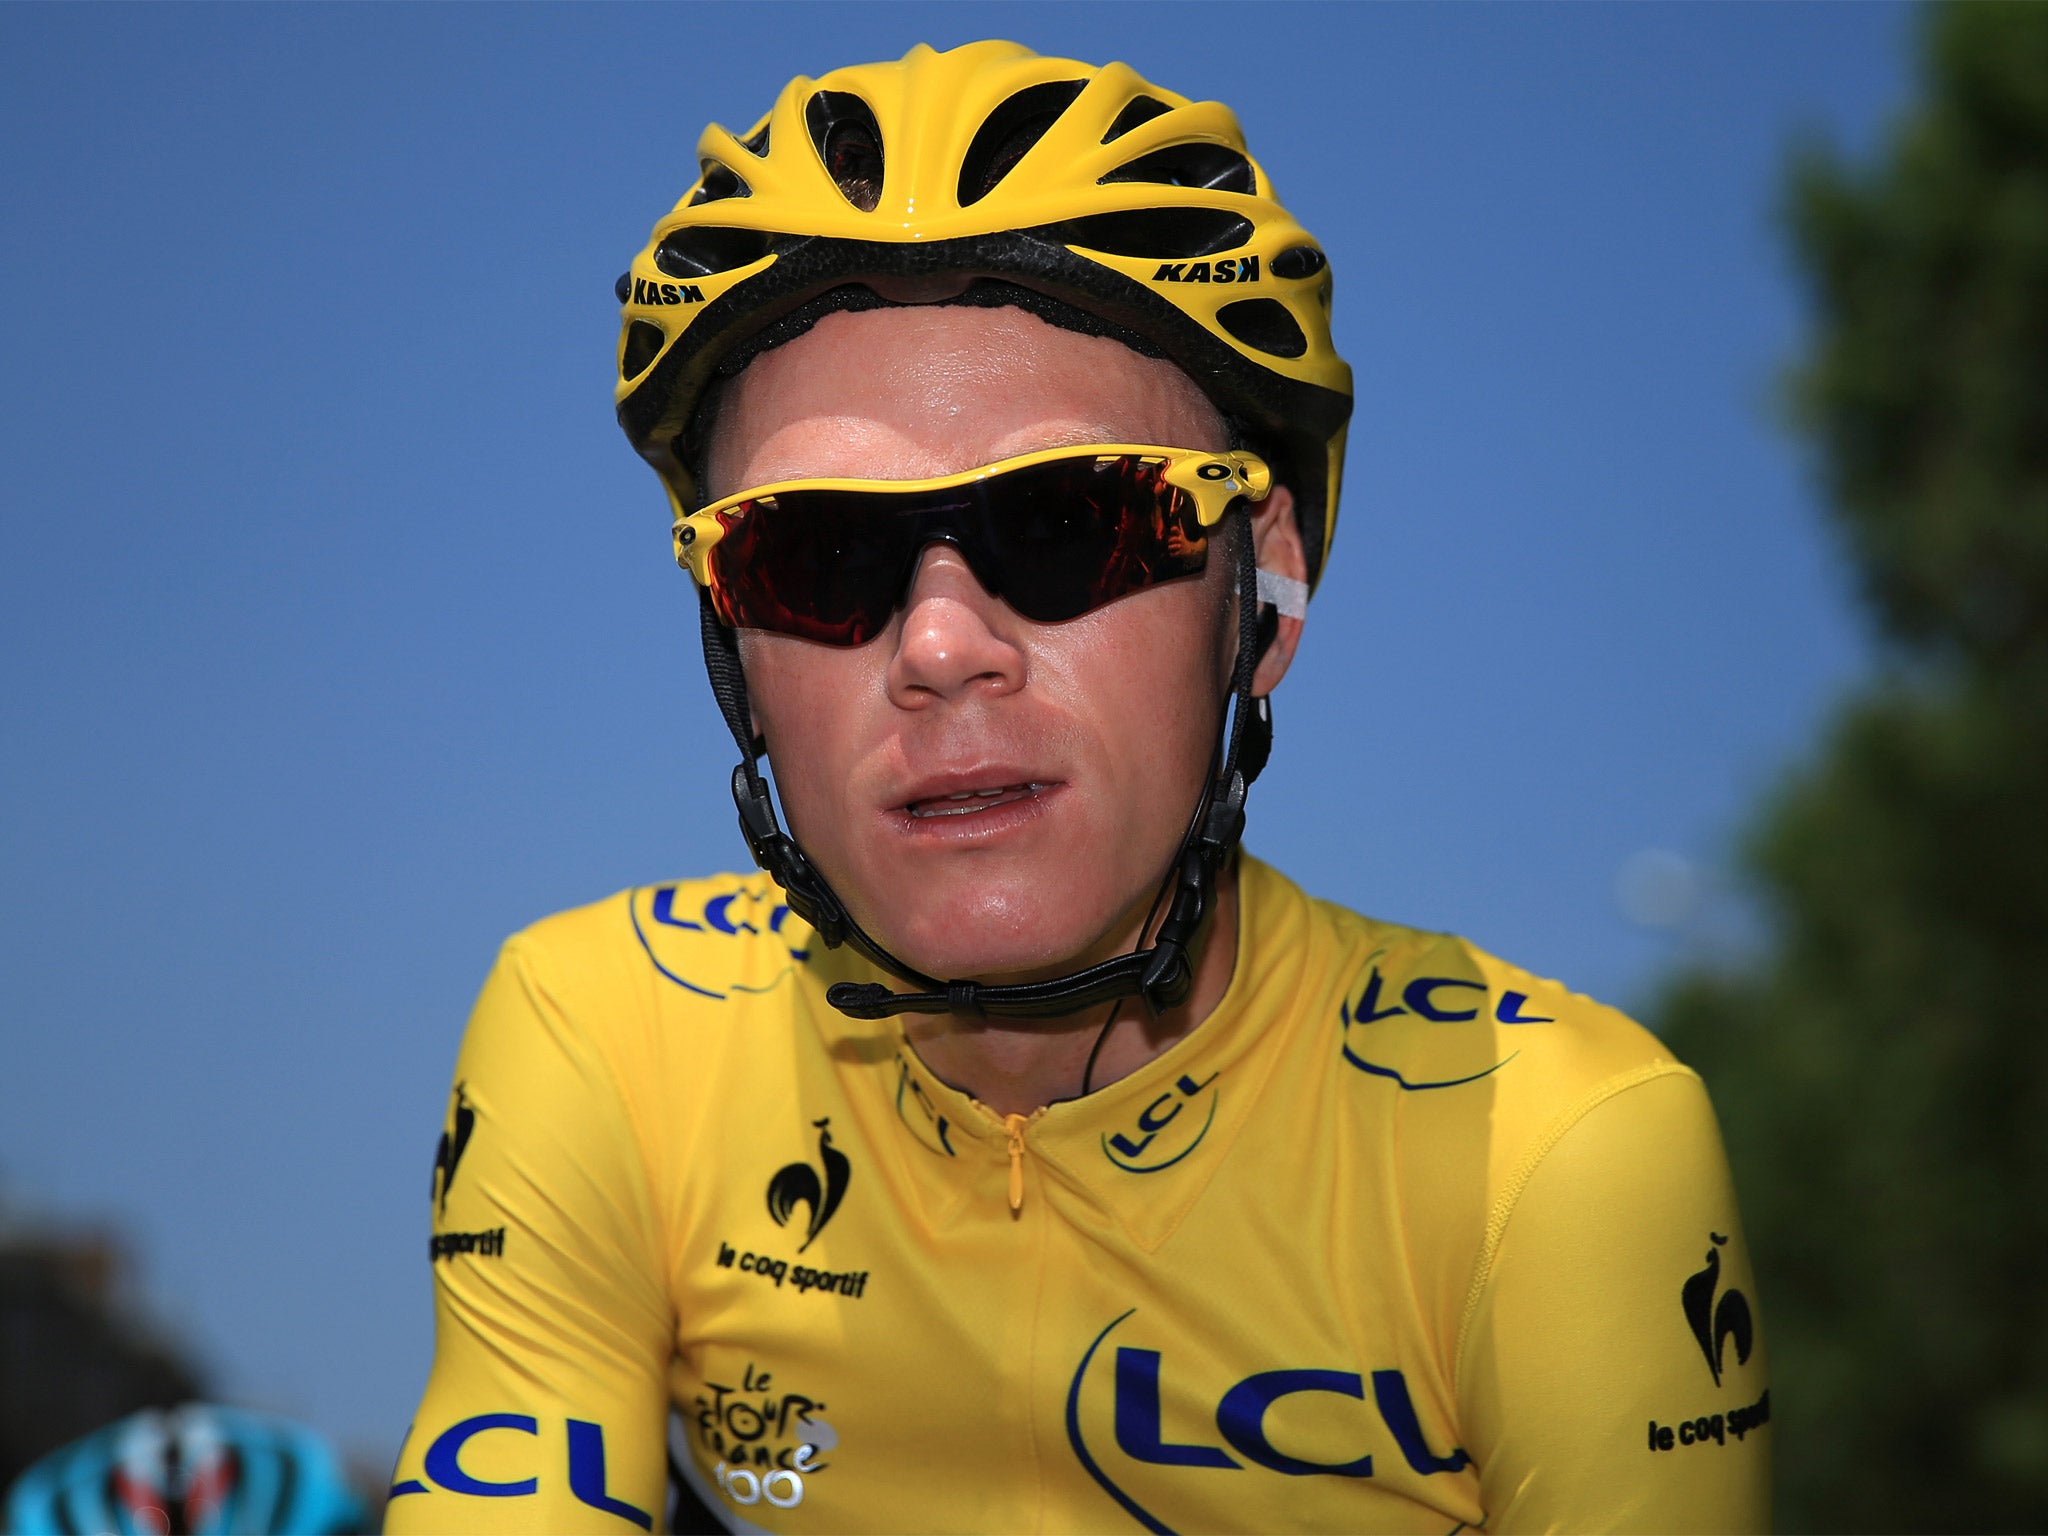 Chris Froome, Team Sky’s leader, says he has recovered from a fall last month